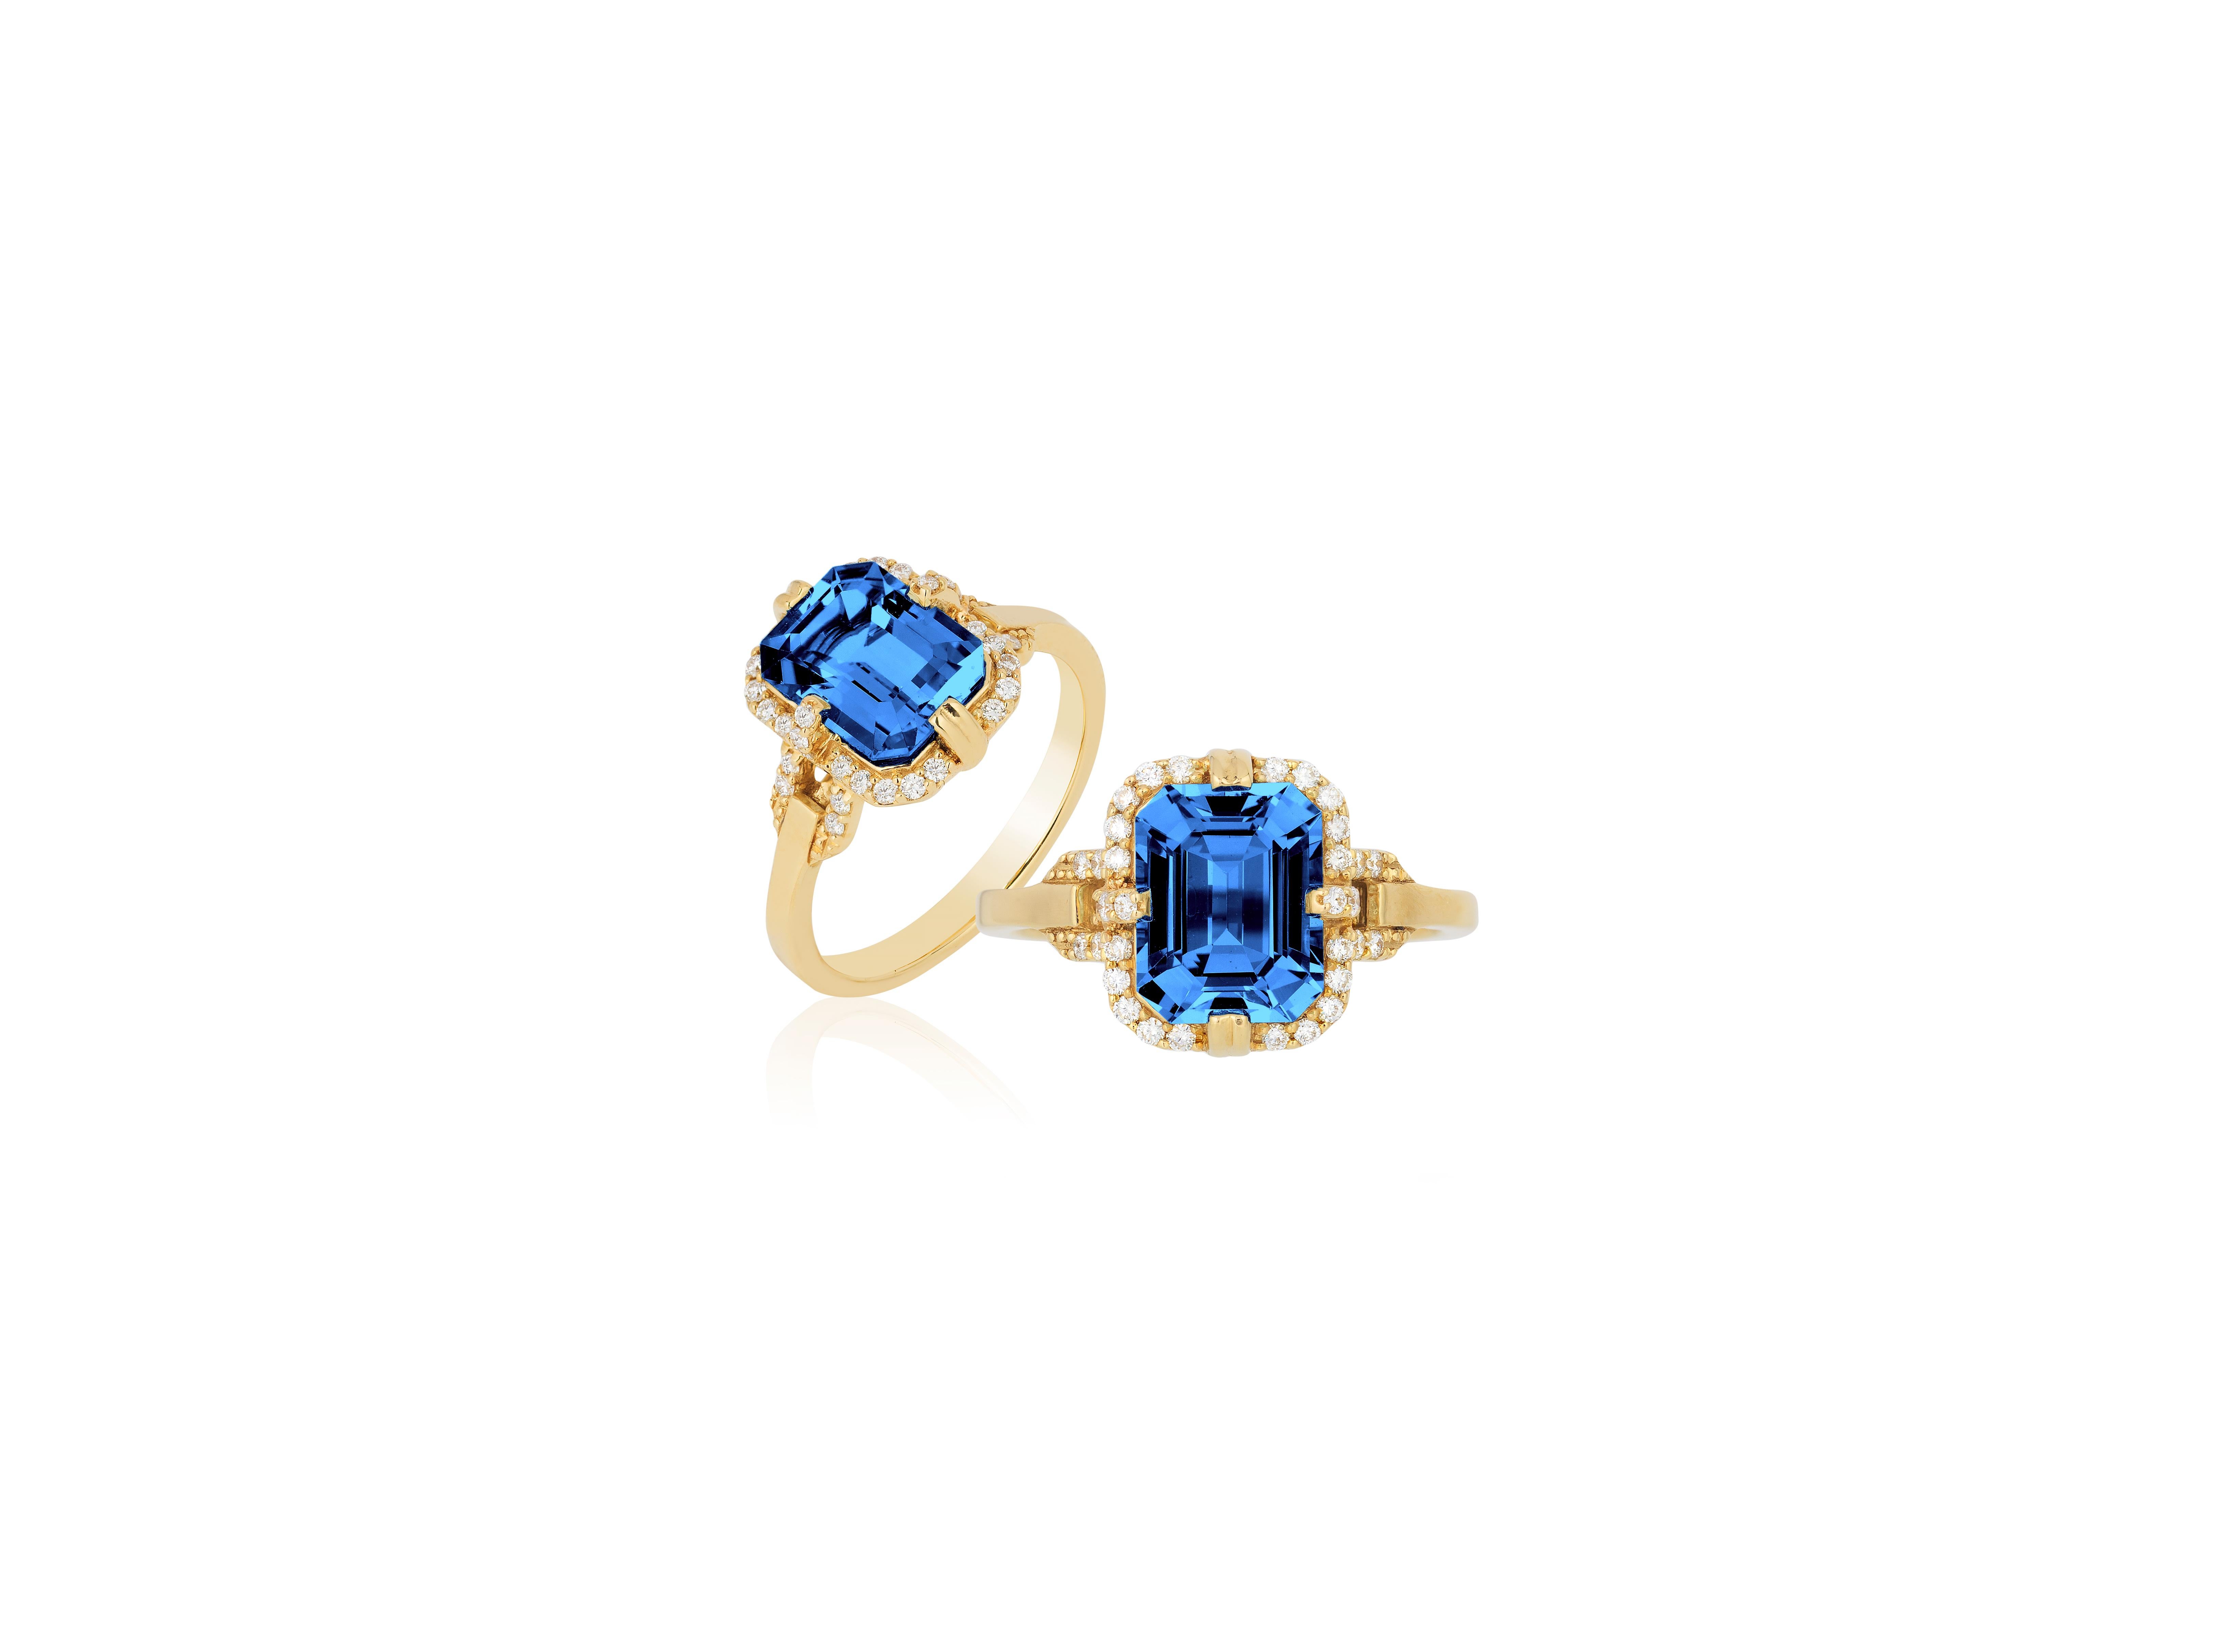 London Blue Topaz Emerald Cut Ring in 18K Yellow Gold with Diamonds, from 'Gossip' Collection. 

* Gemstone size: 9 x 7 mm
* Gemstone: 100% Earth Mined 
* Approx. gemstone Weight: 2.82 Carats

* 100% Natural Earth-Mined Diamonds
* Carat: Approx.: